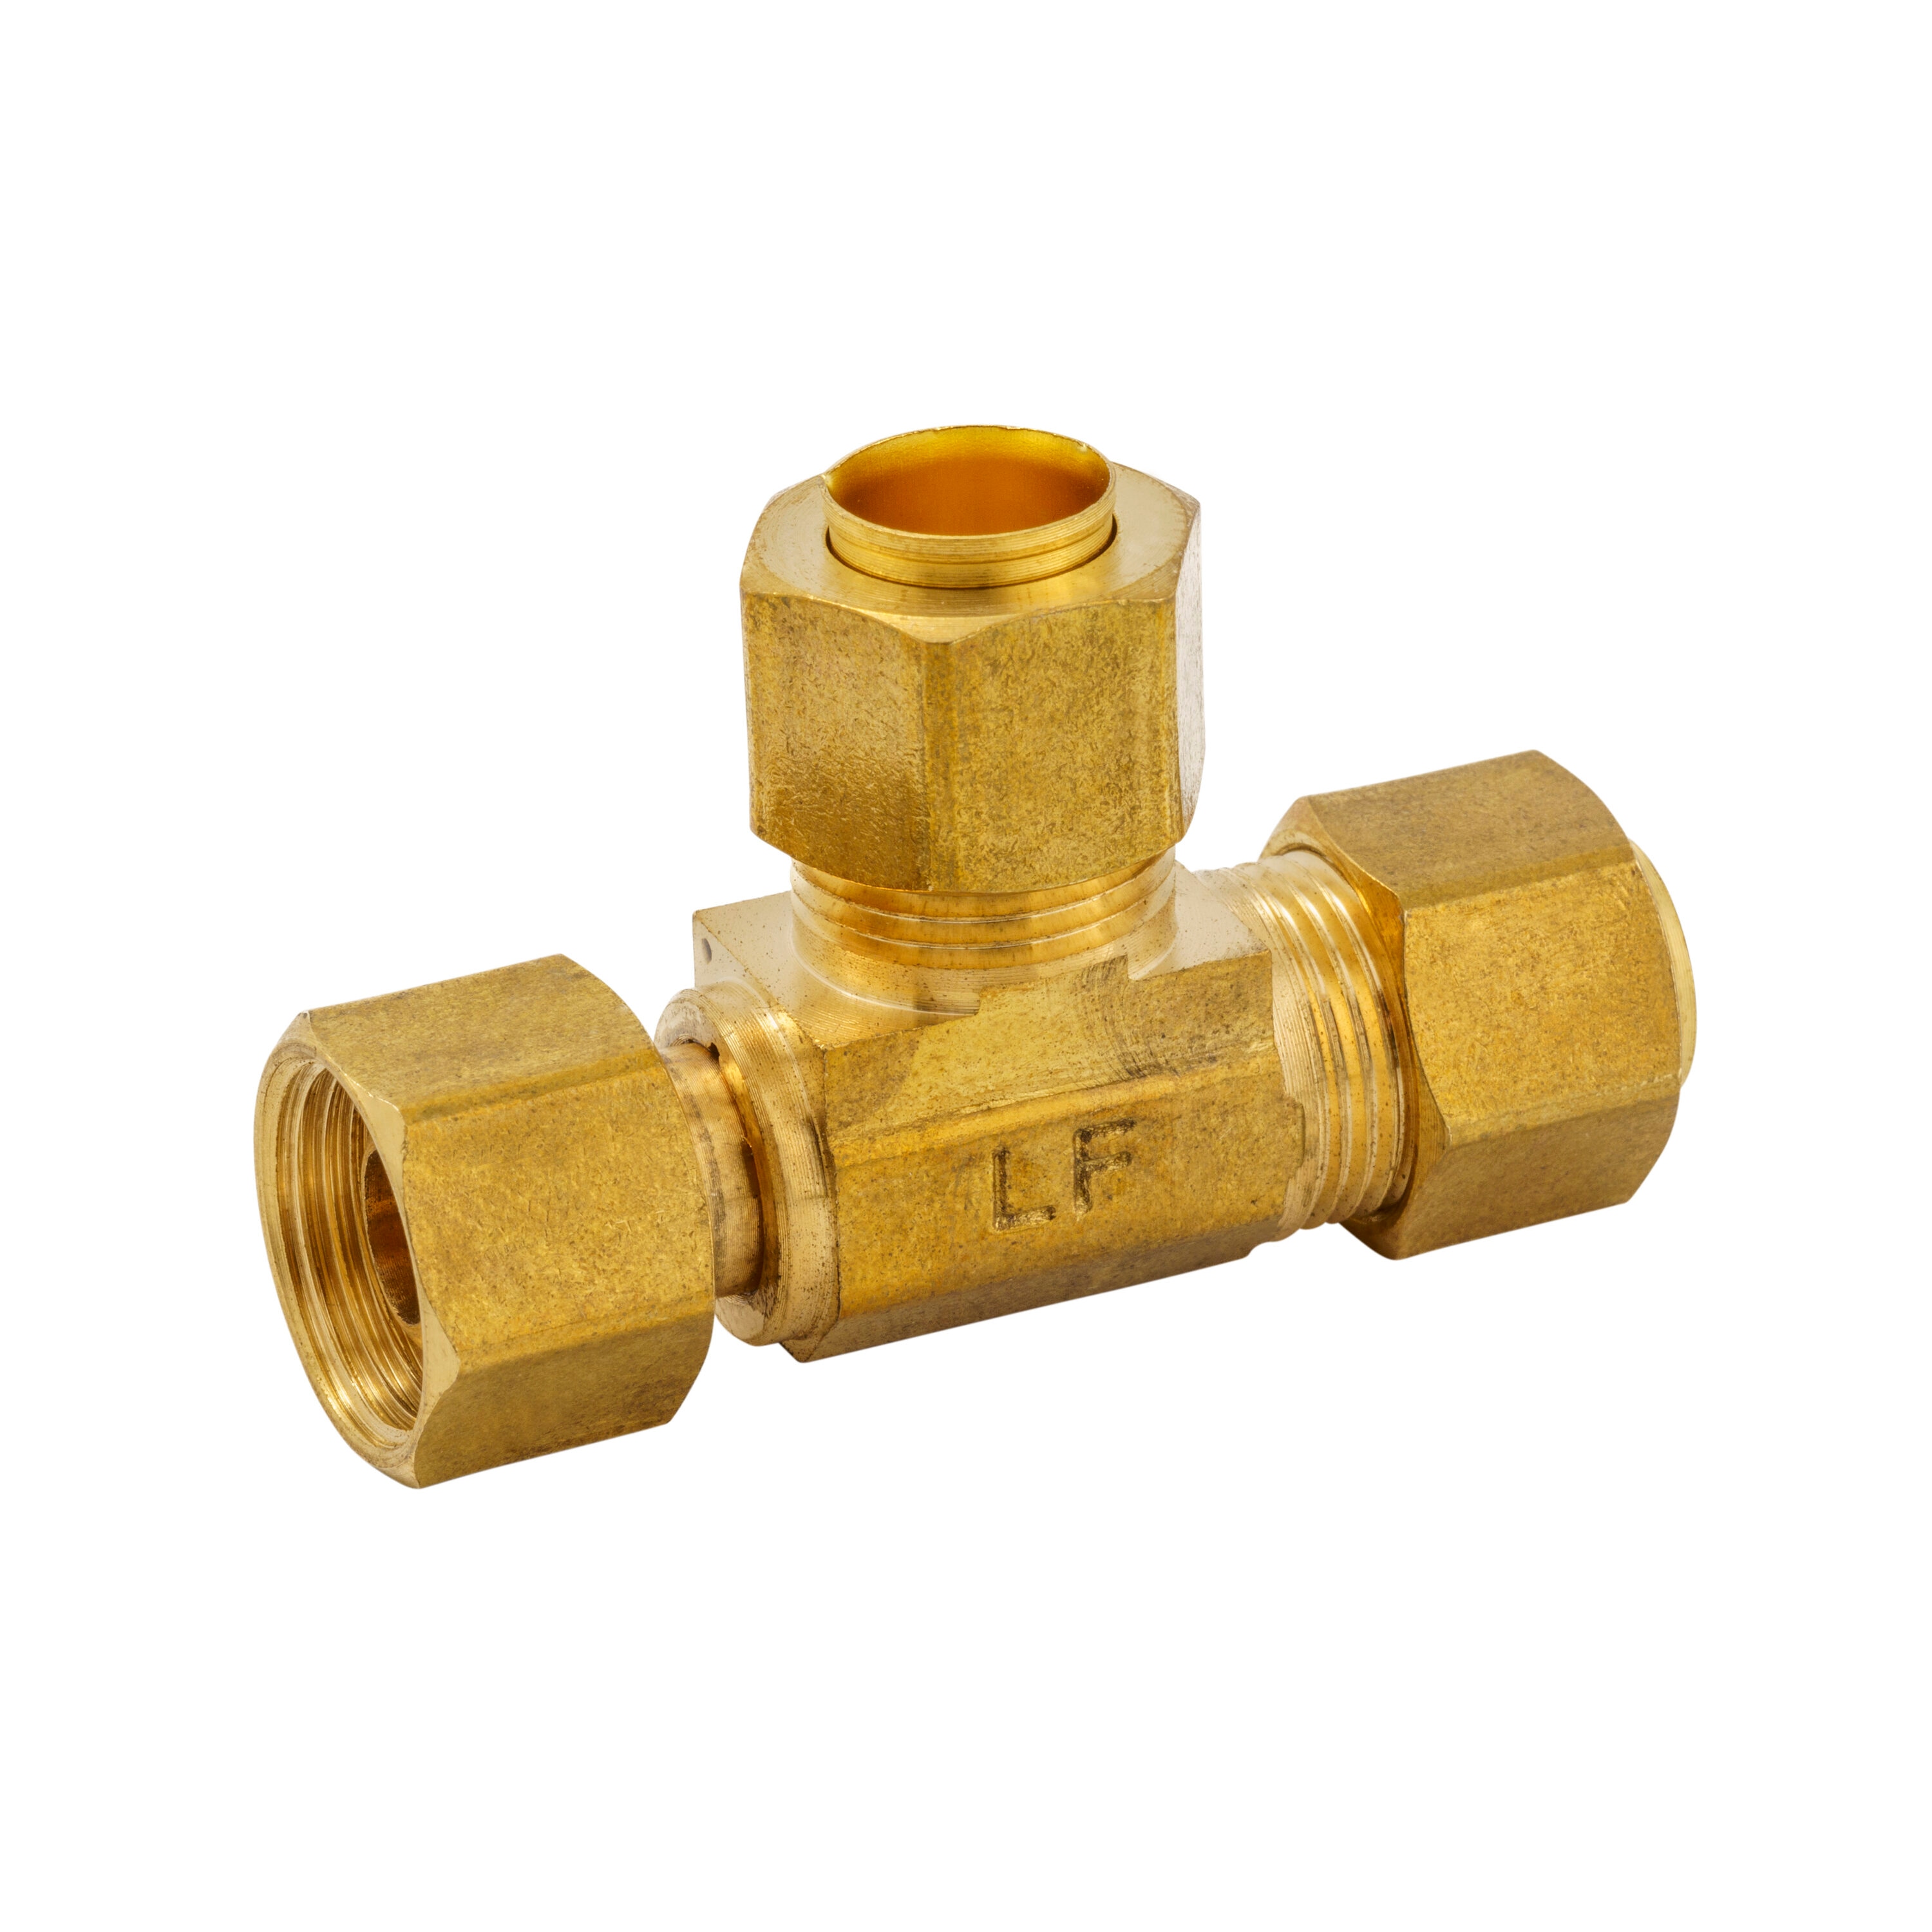 3/8 Compression Tee Valve, Standard Angle Tee Valve, 2 PCS Brass Tee  Adapter 3 Way Valve Compression 3/8'' Inlet and 3/8'' Outlet, Lead Free  Brass